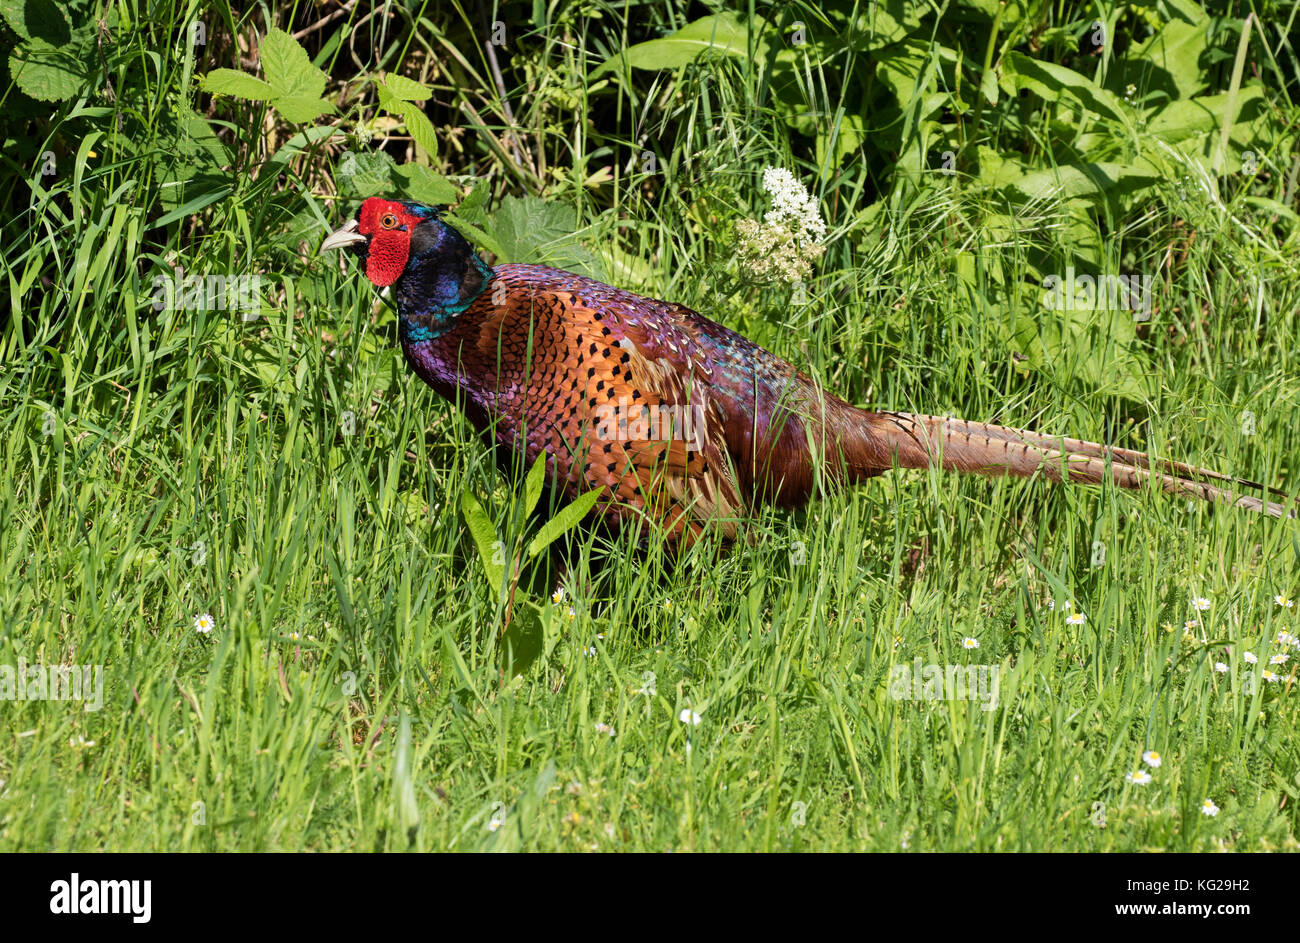 Pheasant, Phasianus colchicus, single adult male walking in long grass. Worcestershire, UK. Stock Photo